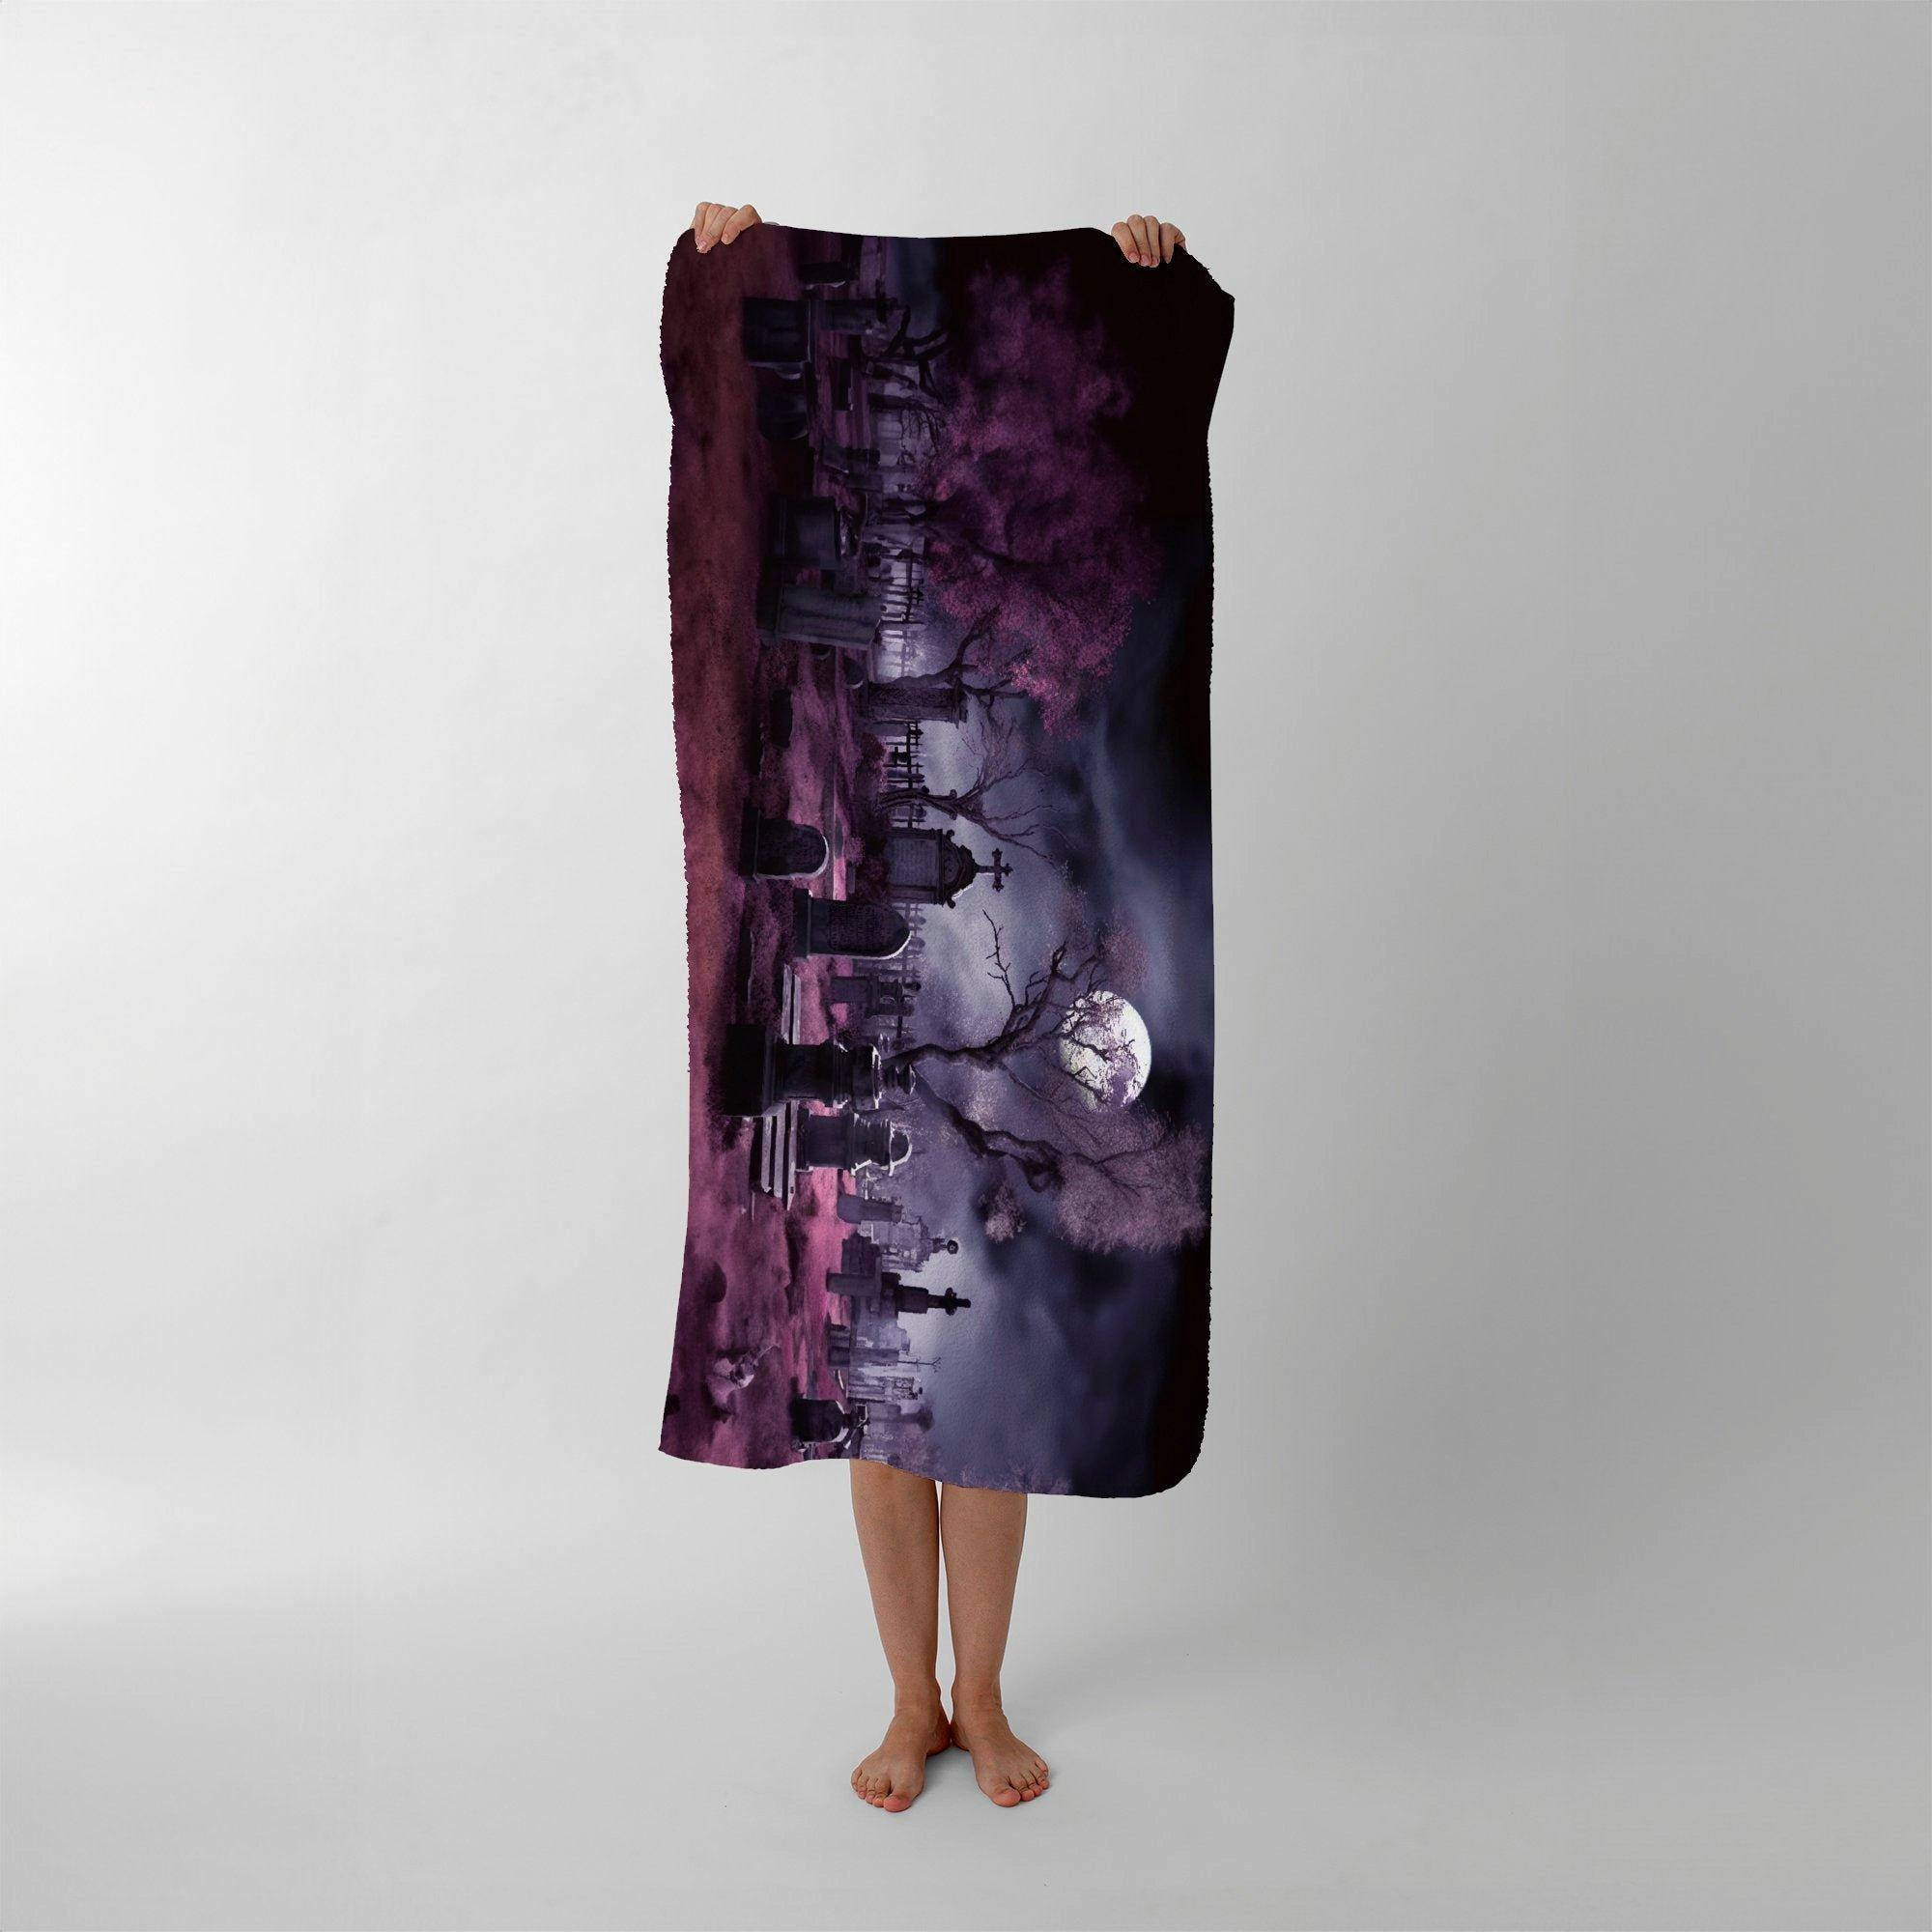 Witchs Moonlit Cemetery Design Beach Towel - image 1